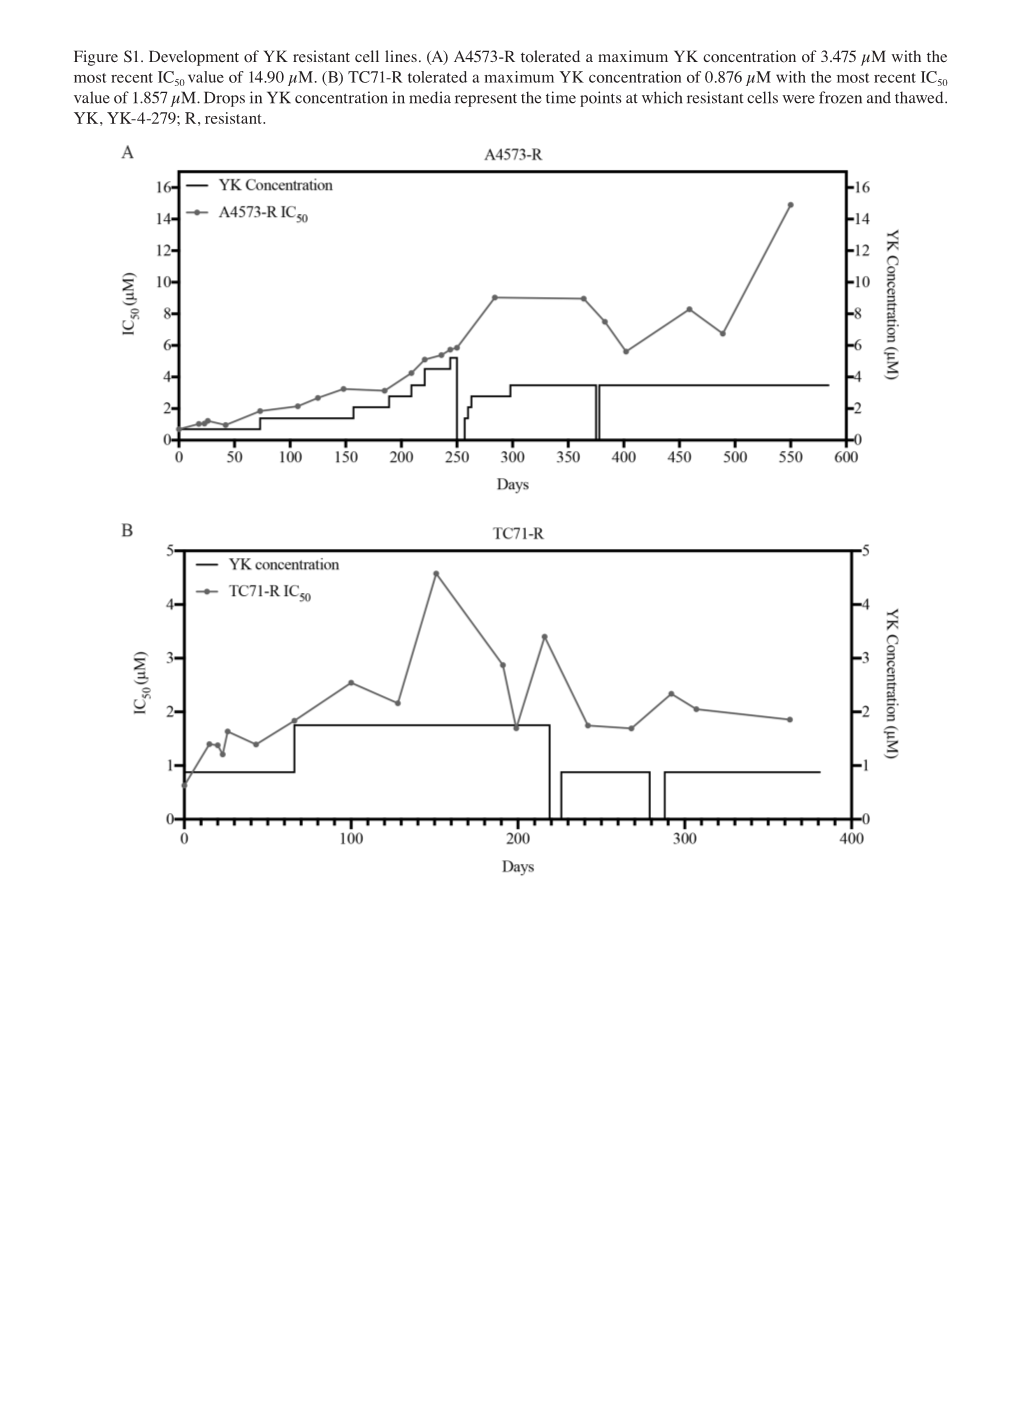 Figure S1. Development of YK Resistant Cell Lines. (A) A4573-R Tolerated a Maximum YK Concentration of 3.475 Μm with the Most Recent IC50 Value of 14.90 Μm